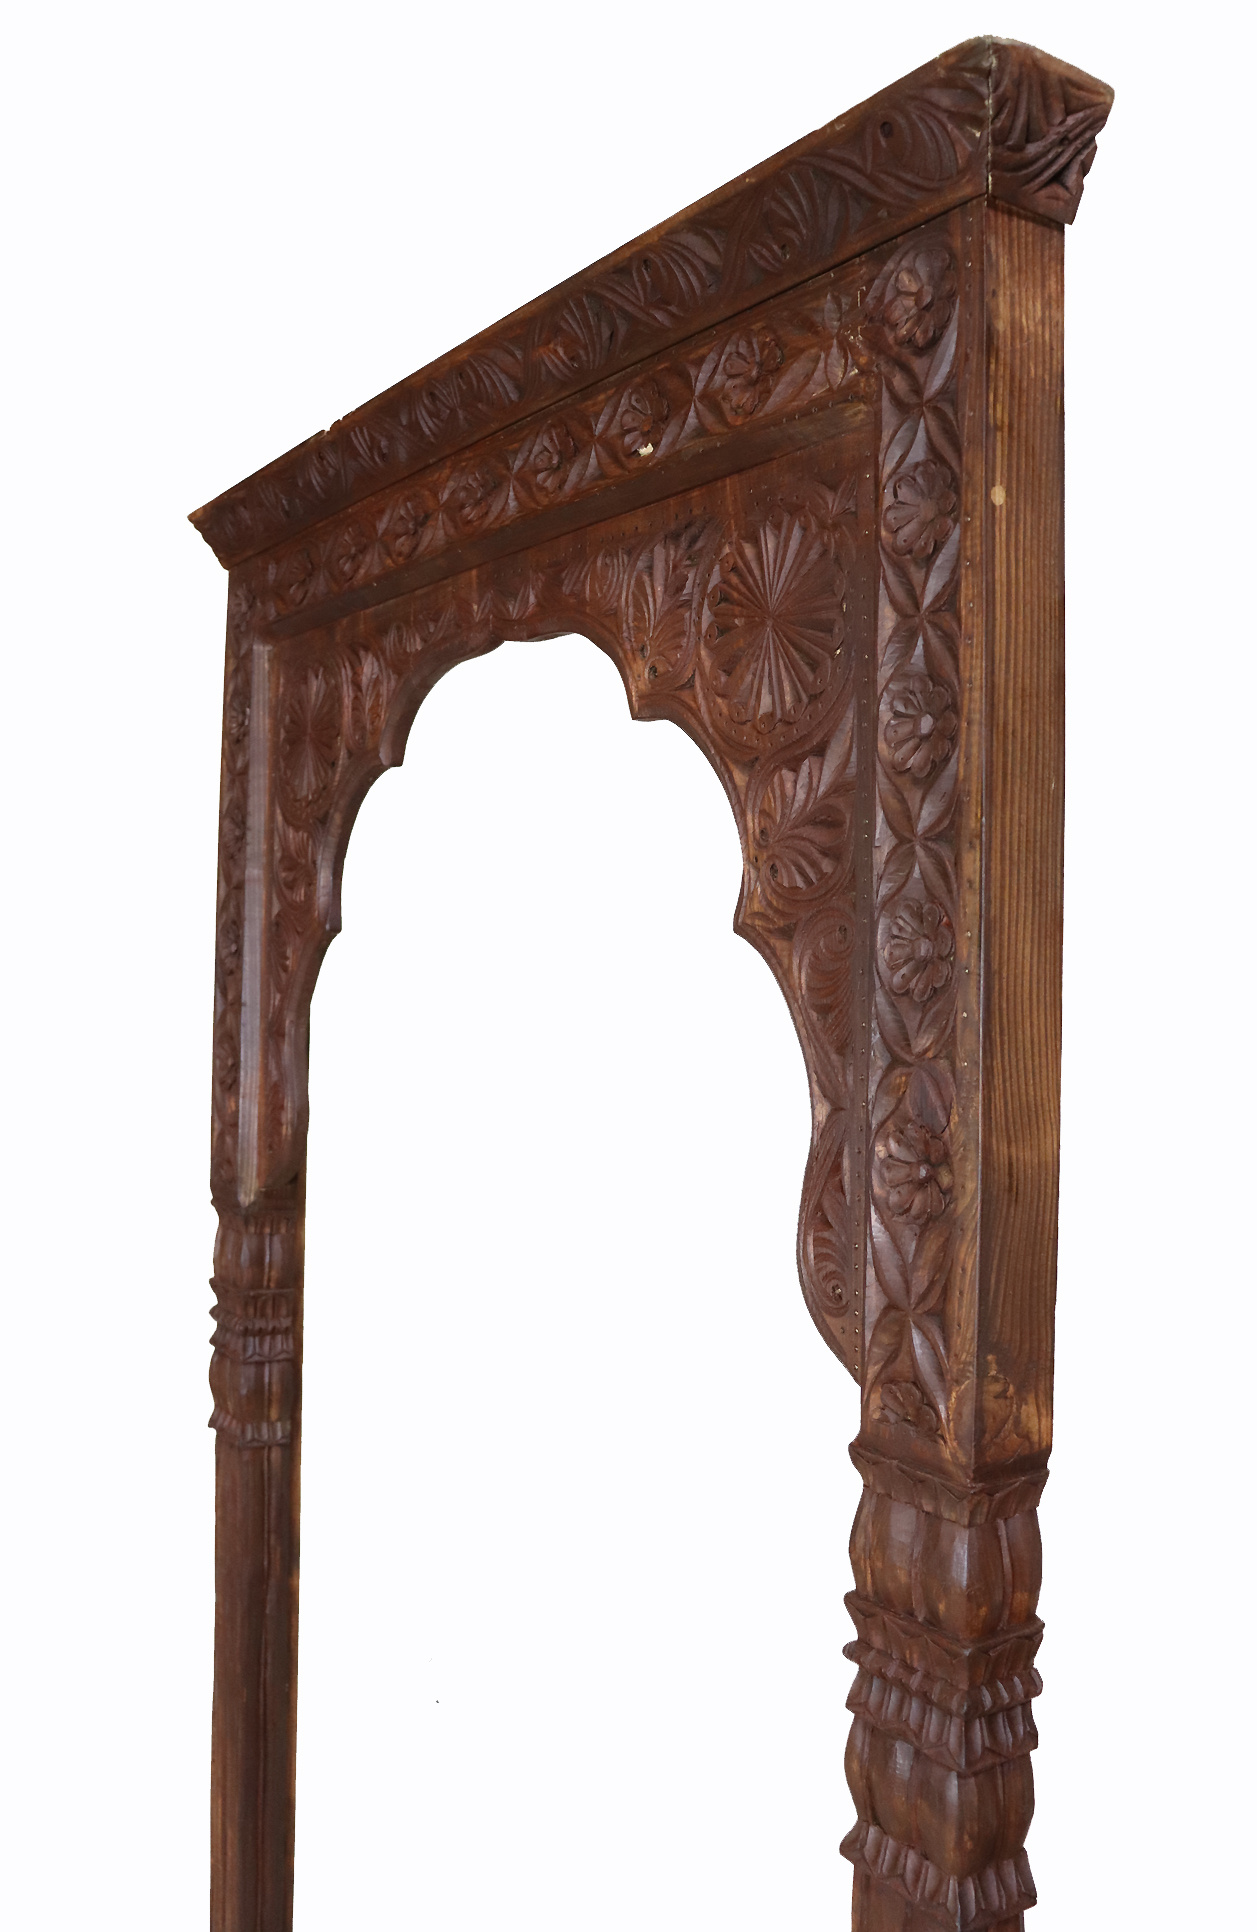 Mirror carving wooden Archway Frame from Nuristan Afghanistan 23/B